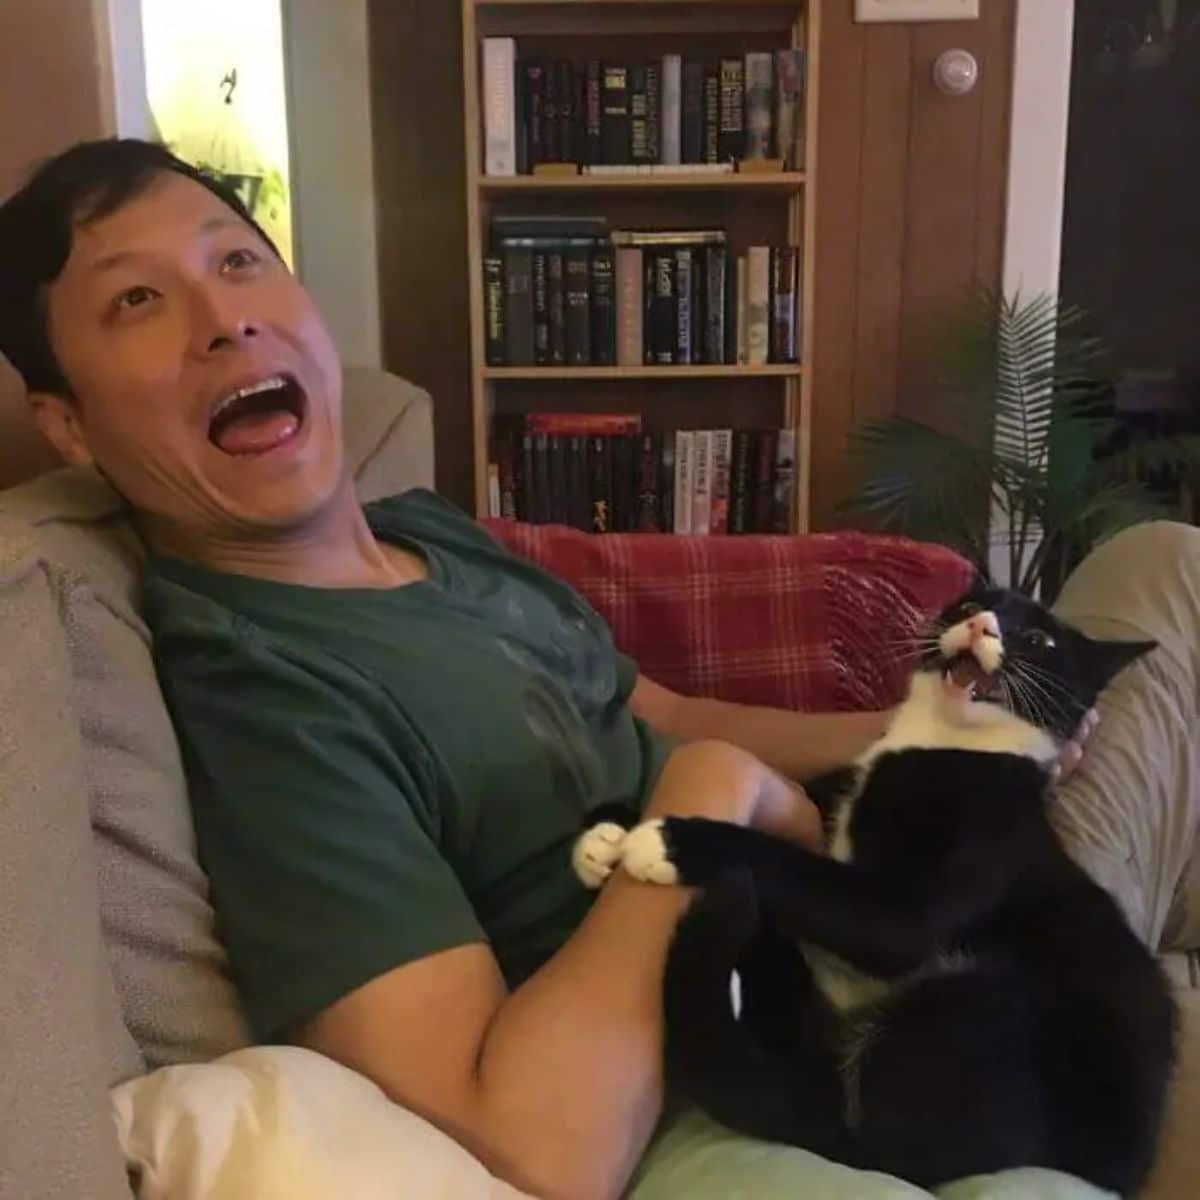 black and white cat sitting on a man's lap holding his arm and both of them have their mouths open